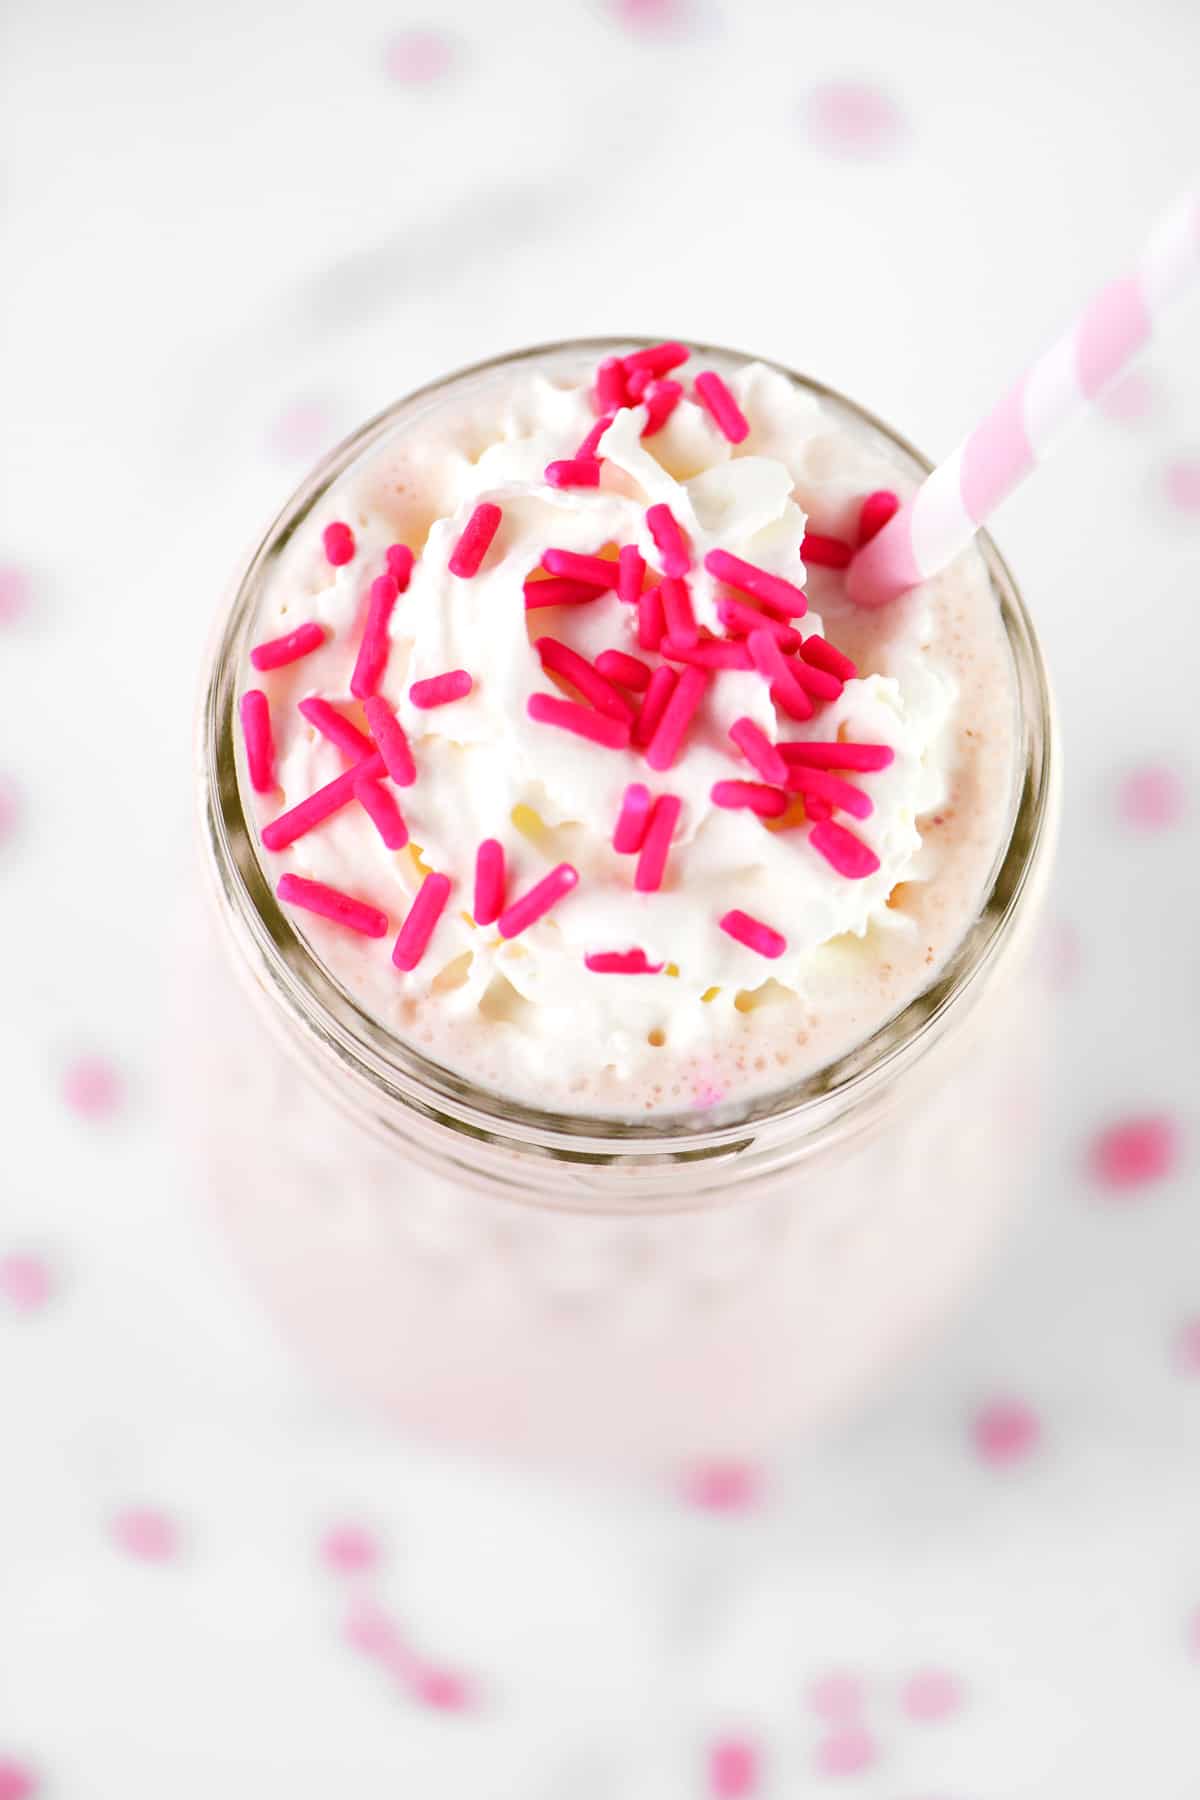 whipped topping, sprinkles and a straw in a strawberry milkshake.